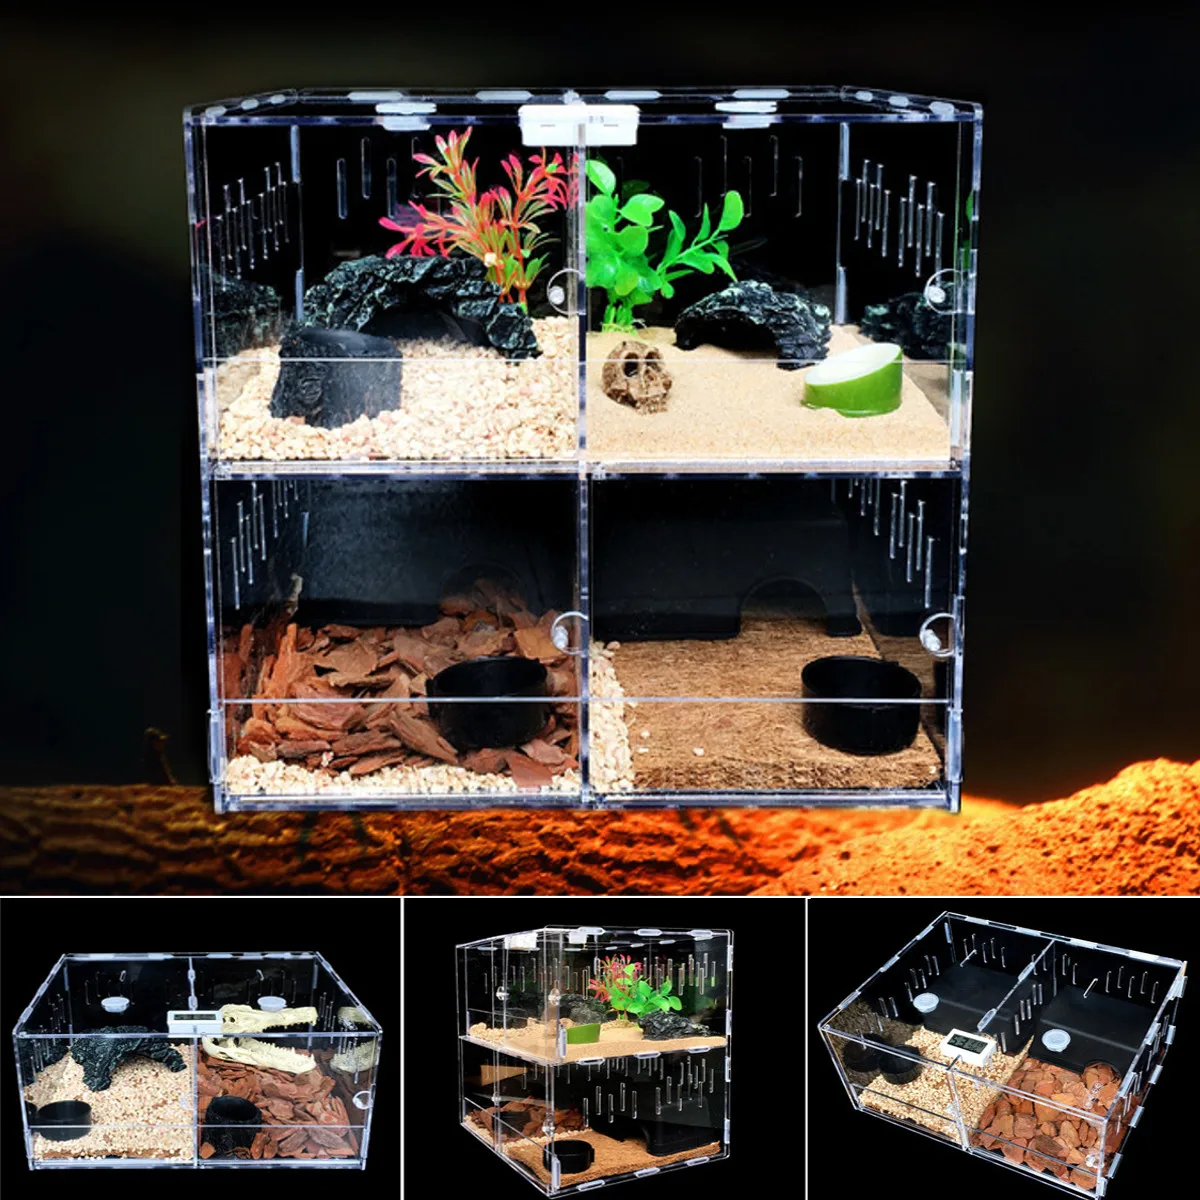 Balacoo 2 Sets of Reptile Breeding Box Clear Acrylic Reptile Cage Habitat Insect Feeding Box Pet Terrarium Tank with Dropper Tongs for Lizard Spider Scorpion Hermit Carbs Amphibians 